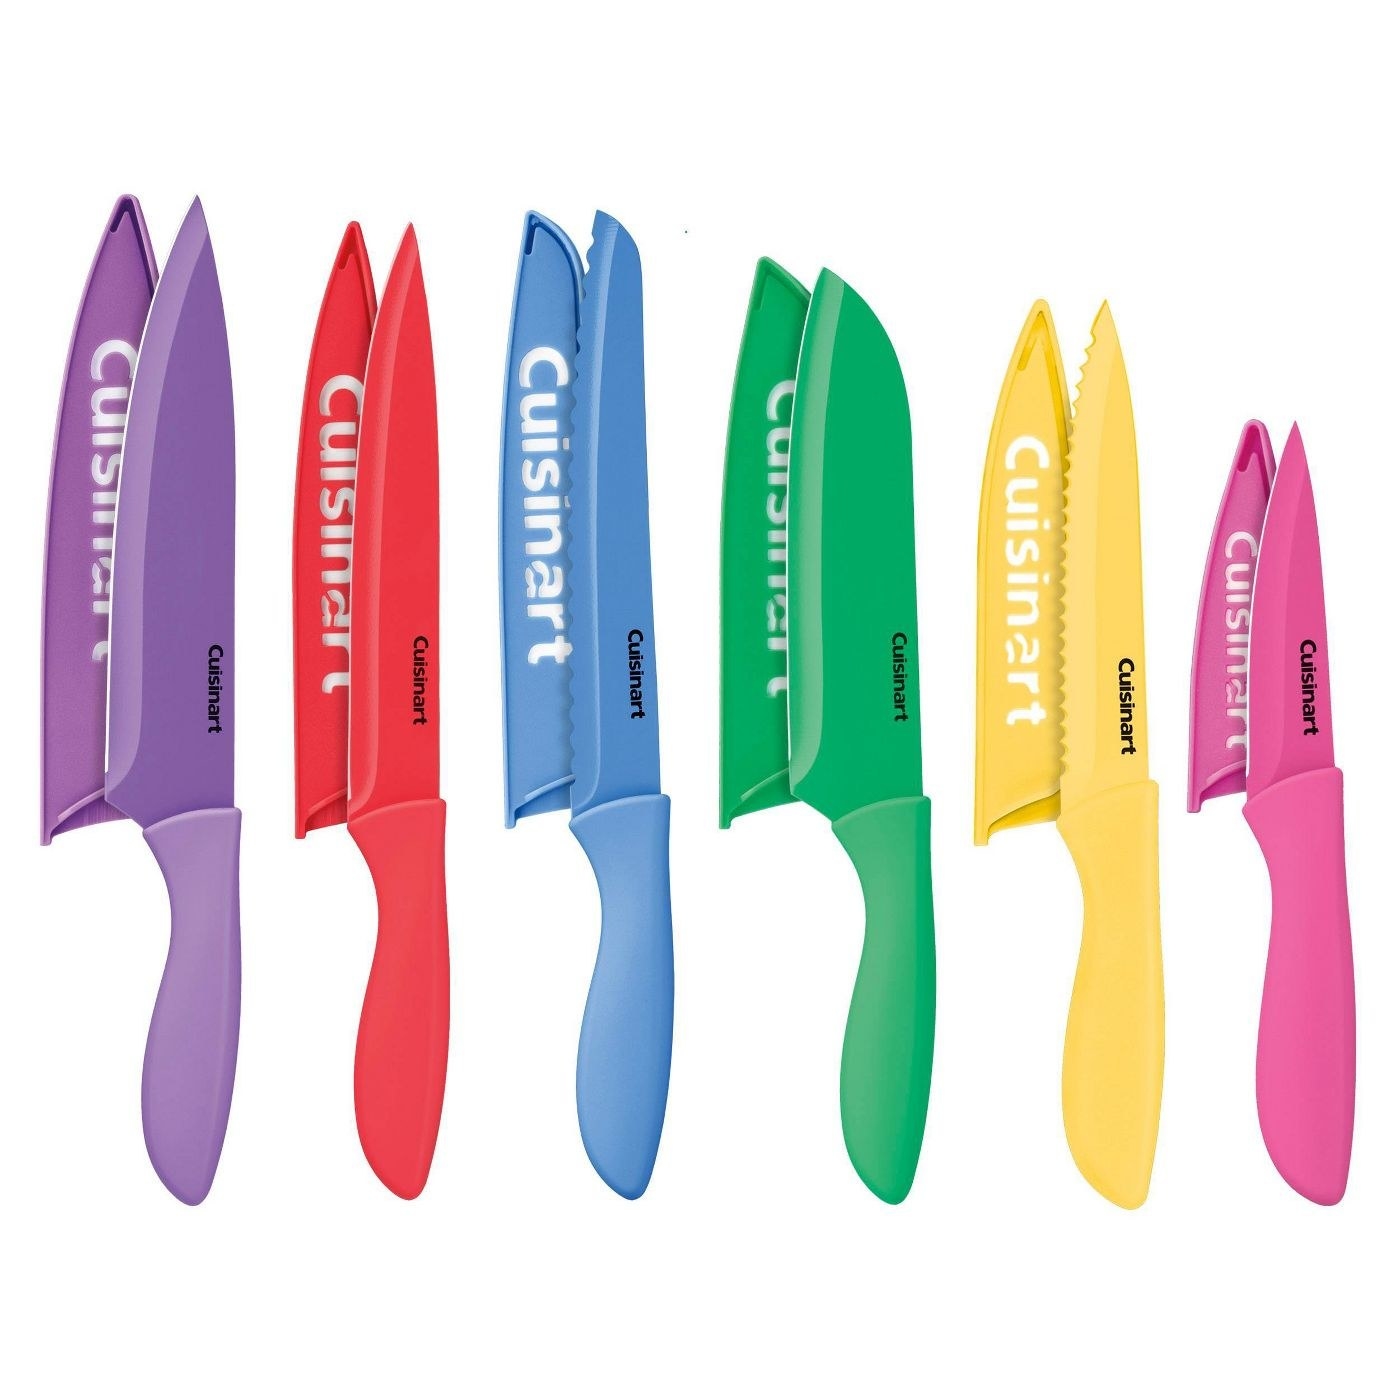 six knives with guards that are purple, red, blue, green, yellow, and pink